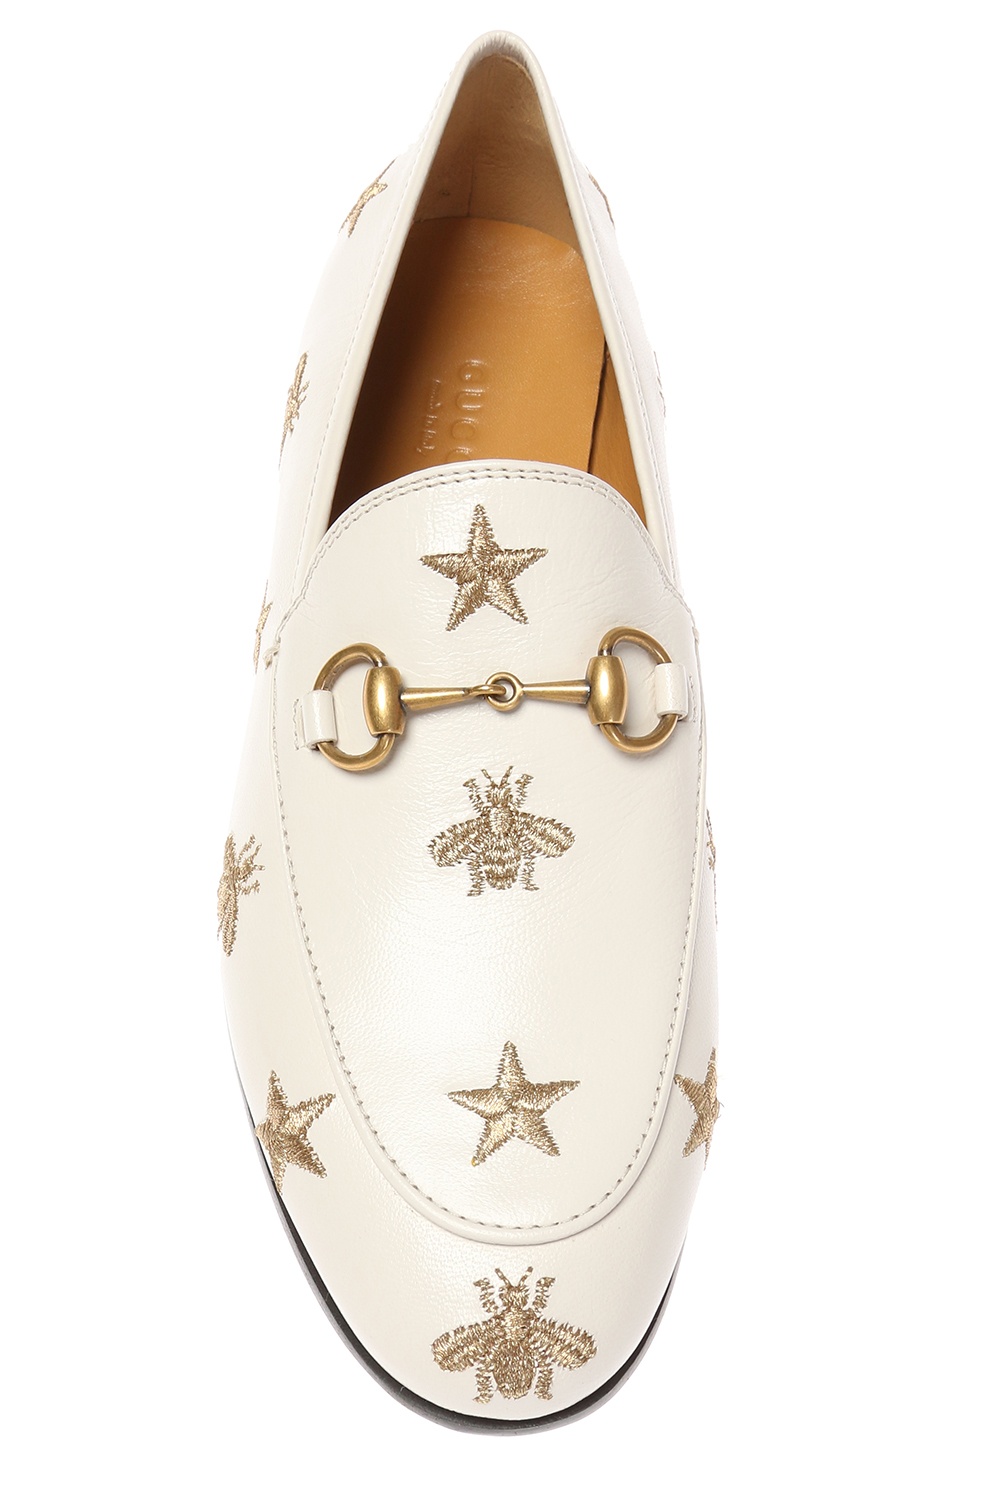 Gucci White Bee & Star Embroidered Leather Jordaan Loafers Size